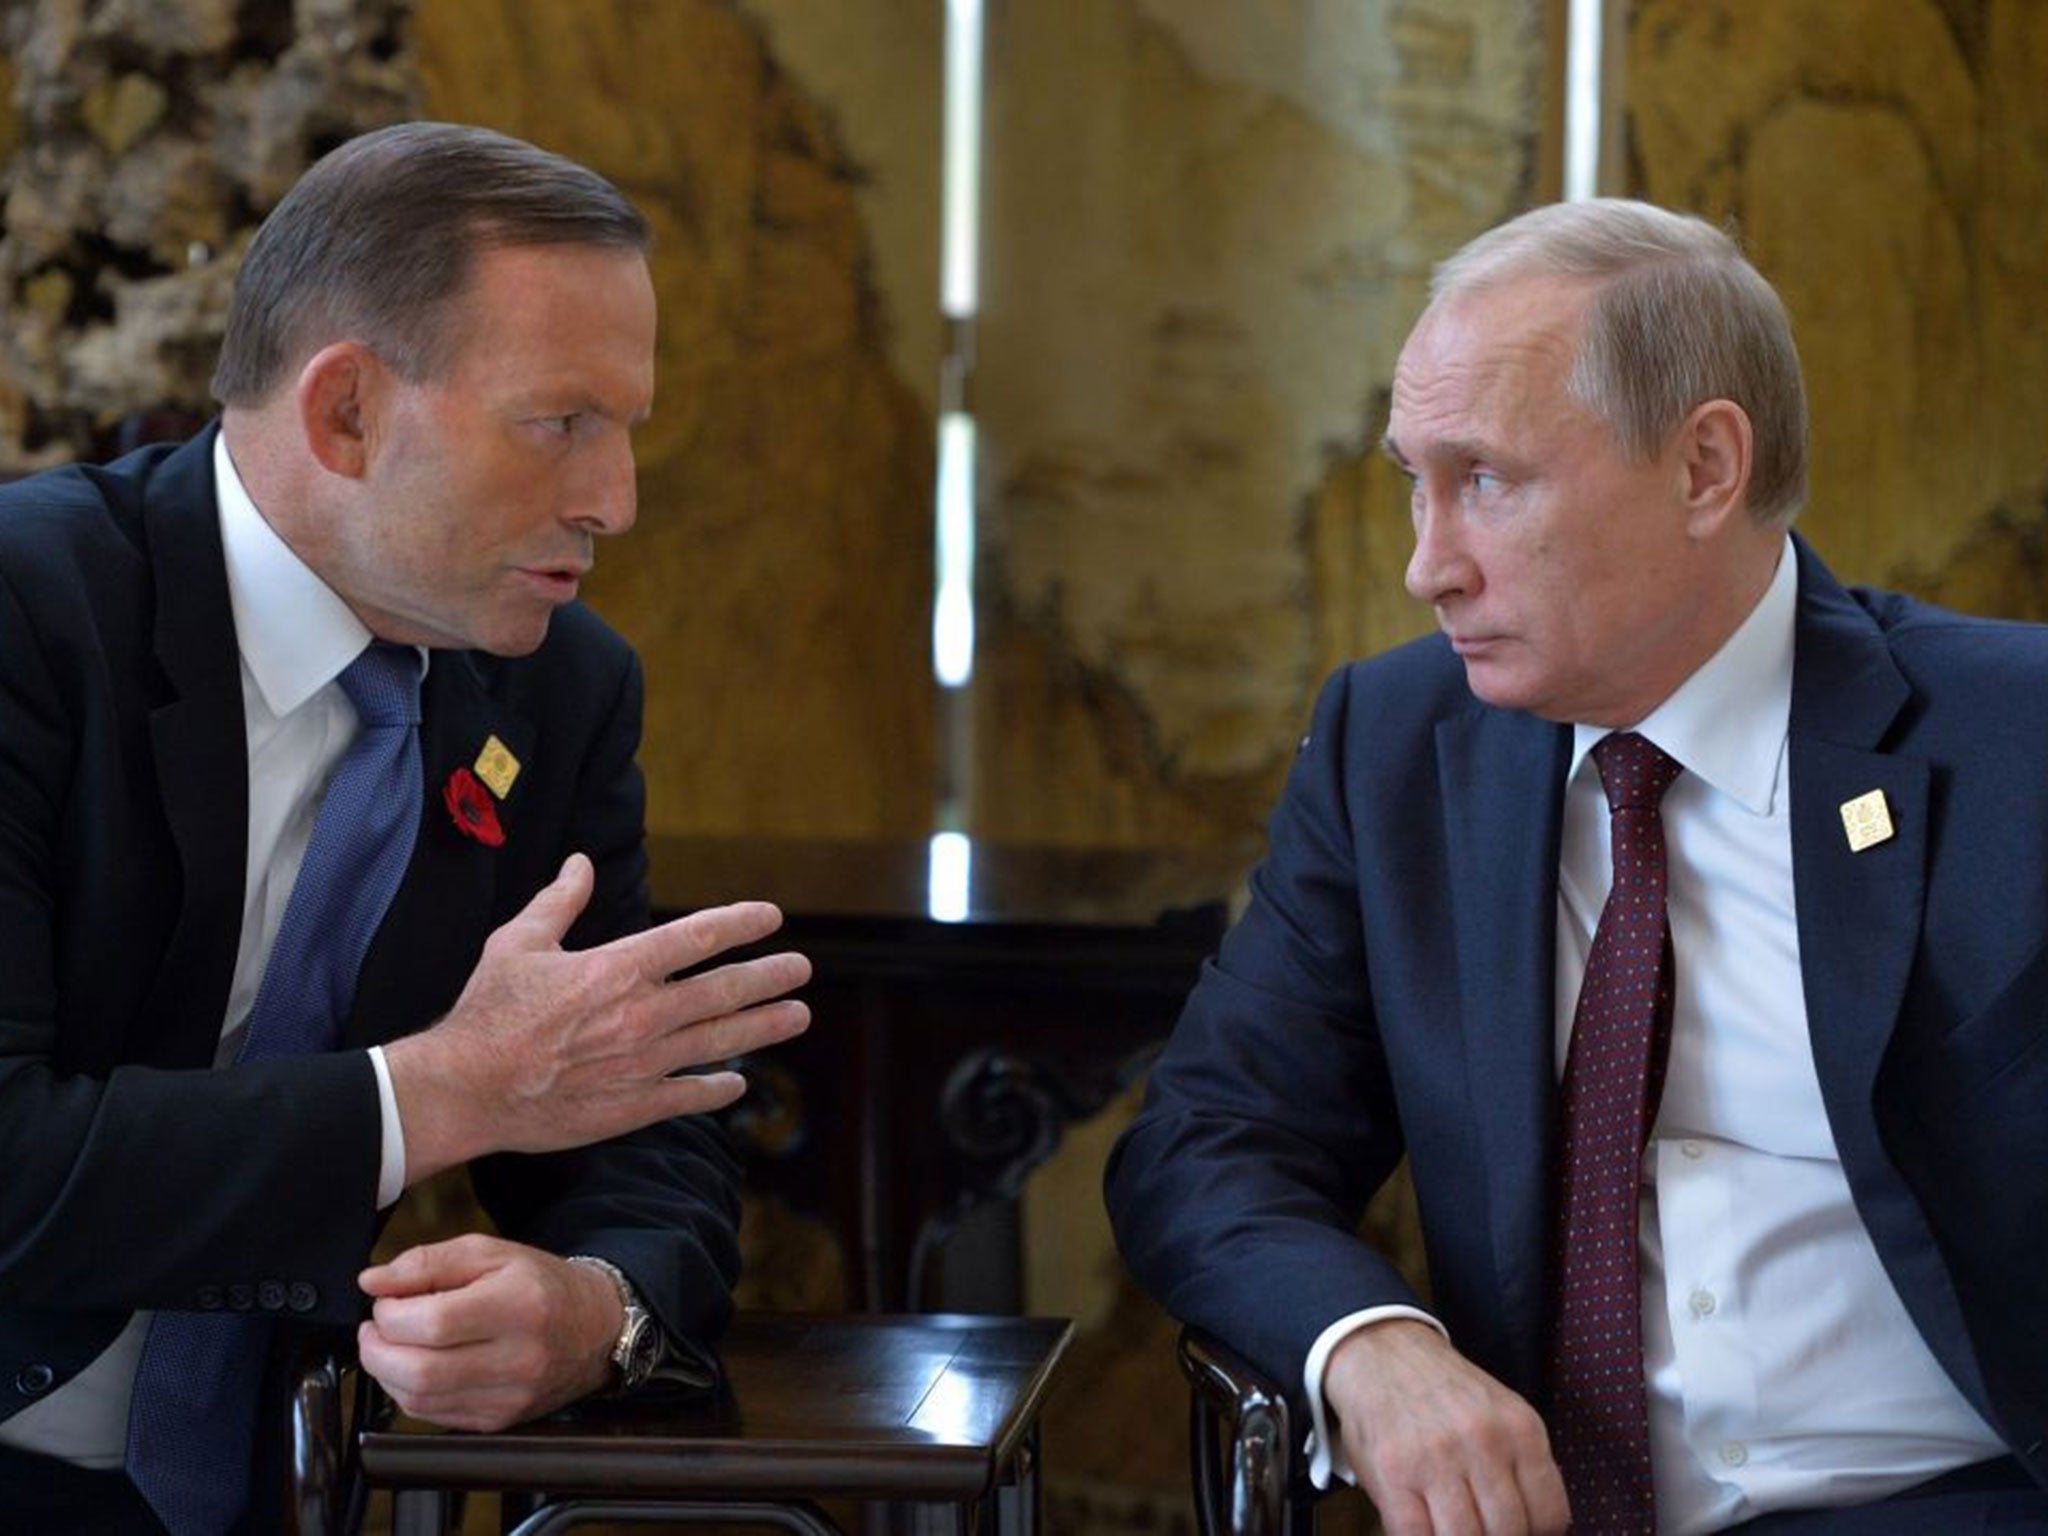 Russian President Vladimir Putin, right, and Australian Prime Minister Tony Abbott talk on the sidelines of the Asia-Pacific Economic Cooperation (APEC) Summit in Beijing